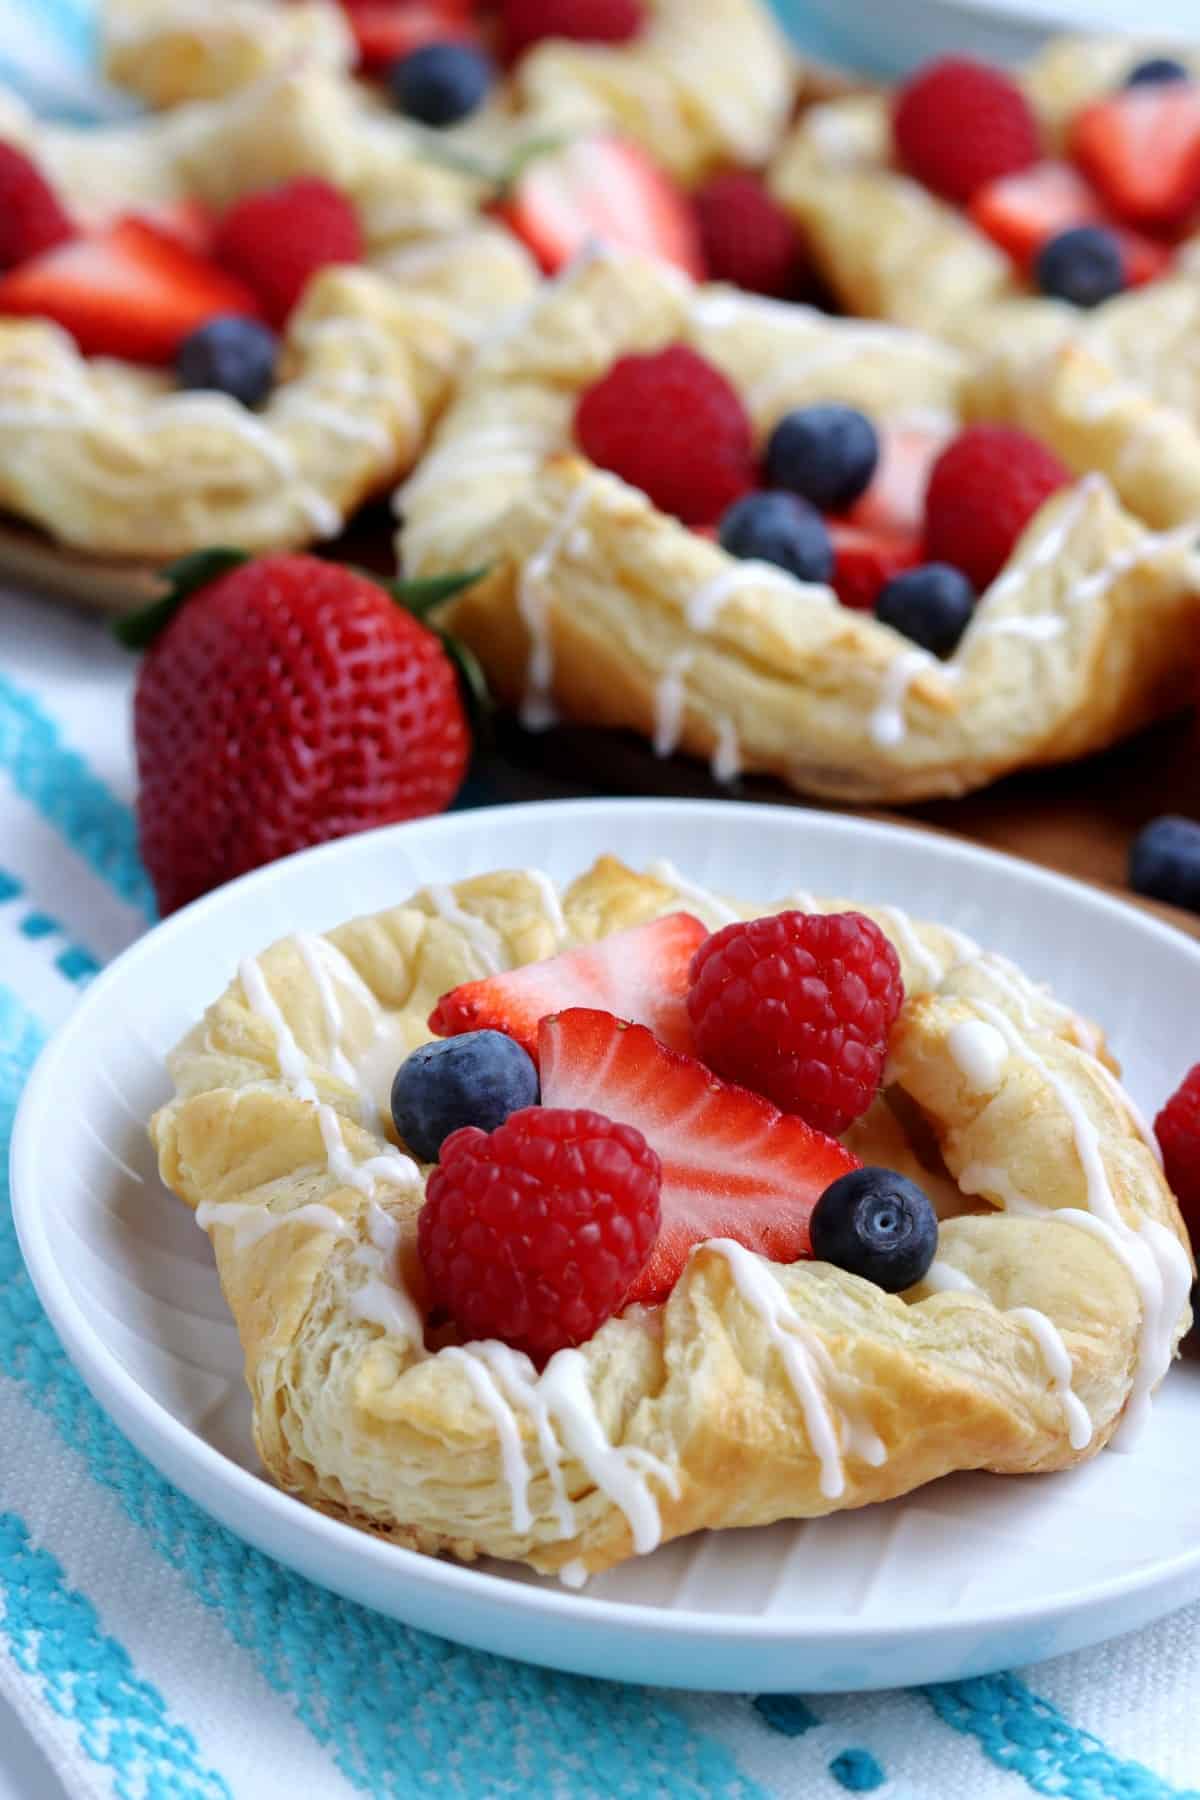 Centered breakfast treat has berries in the center with more pastries behind.